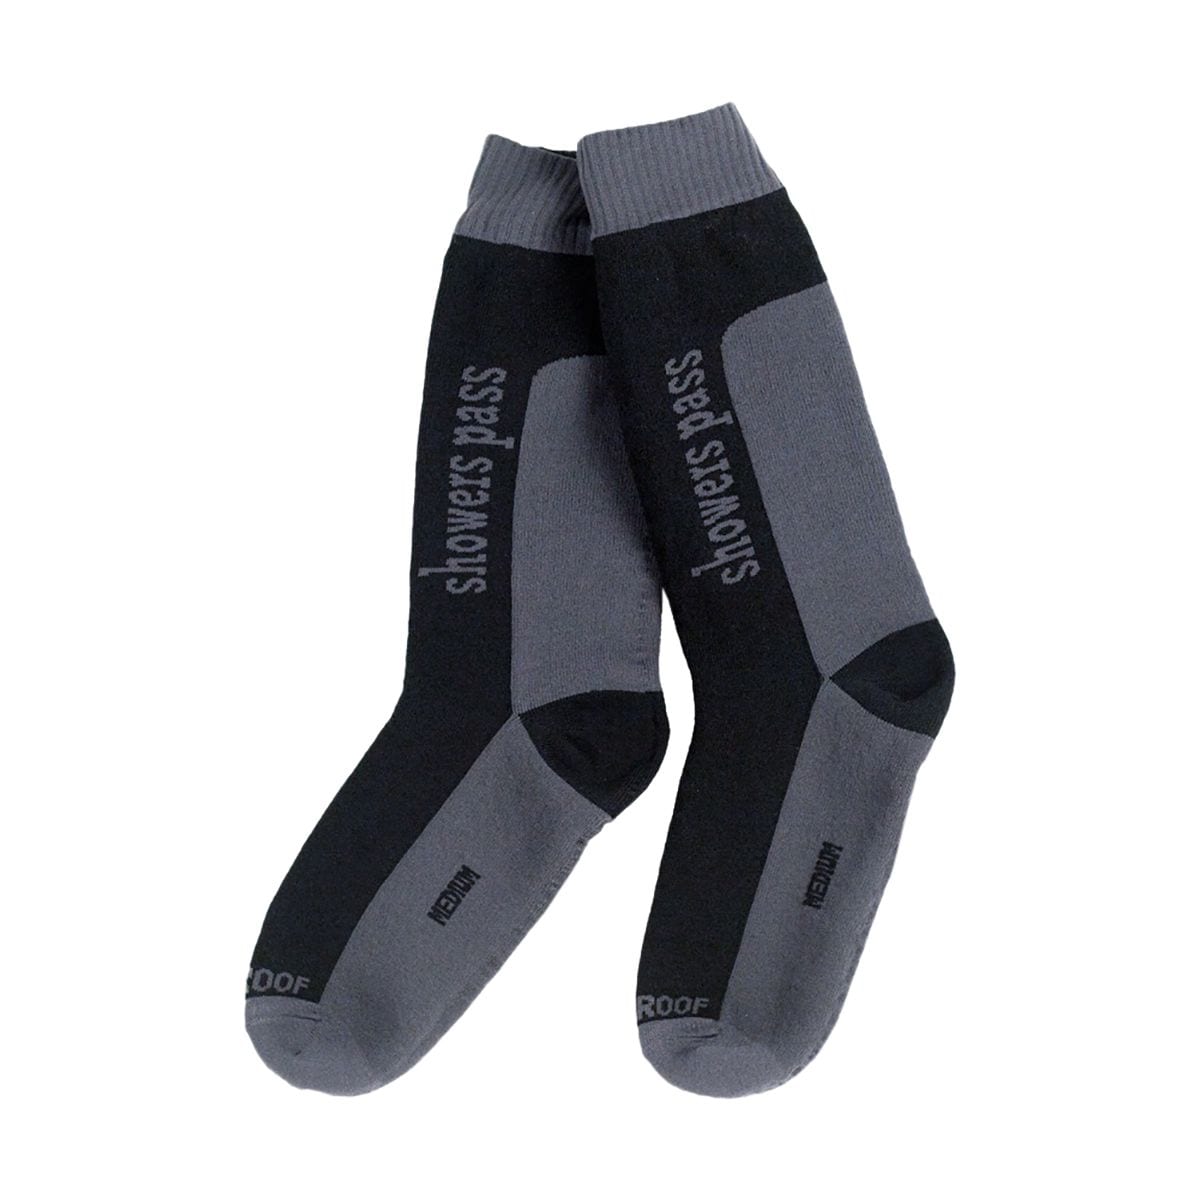 Showers Pass Crosspoint Waterproof Crew Socks | Competitive Cyclist